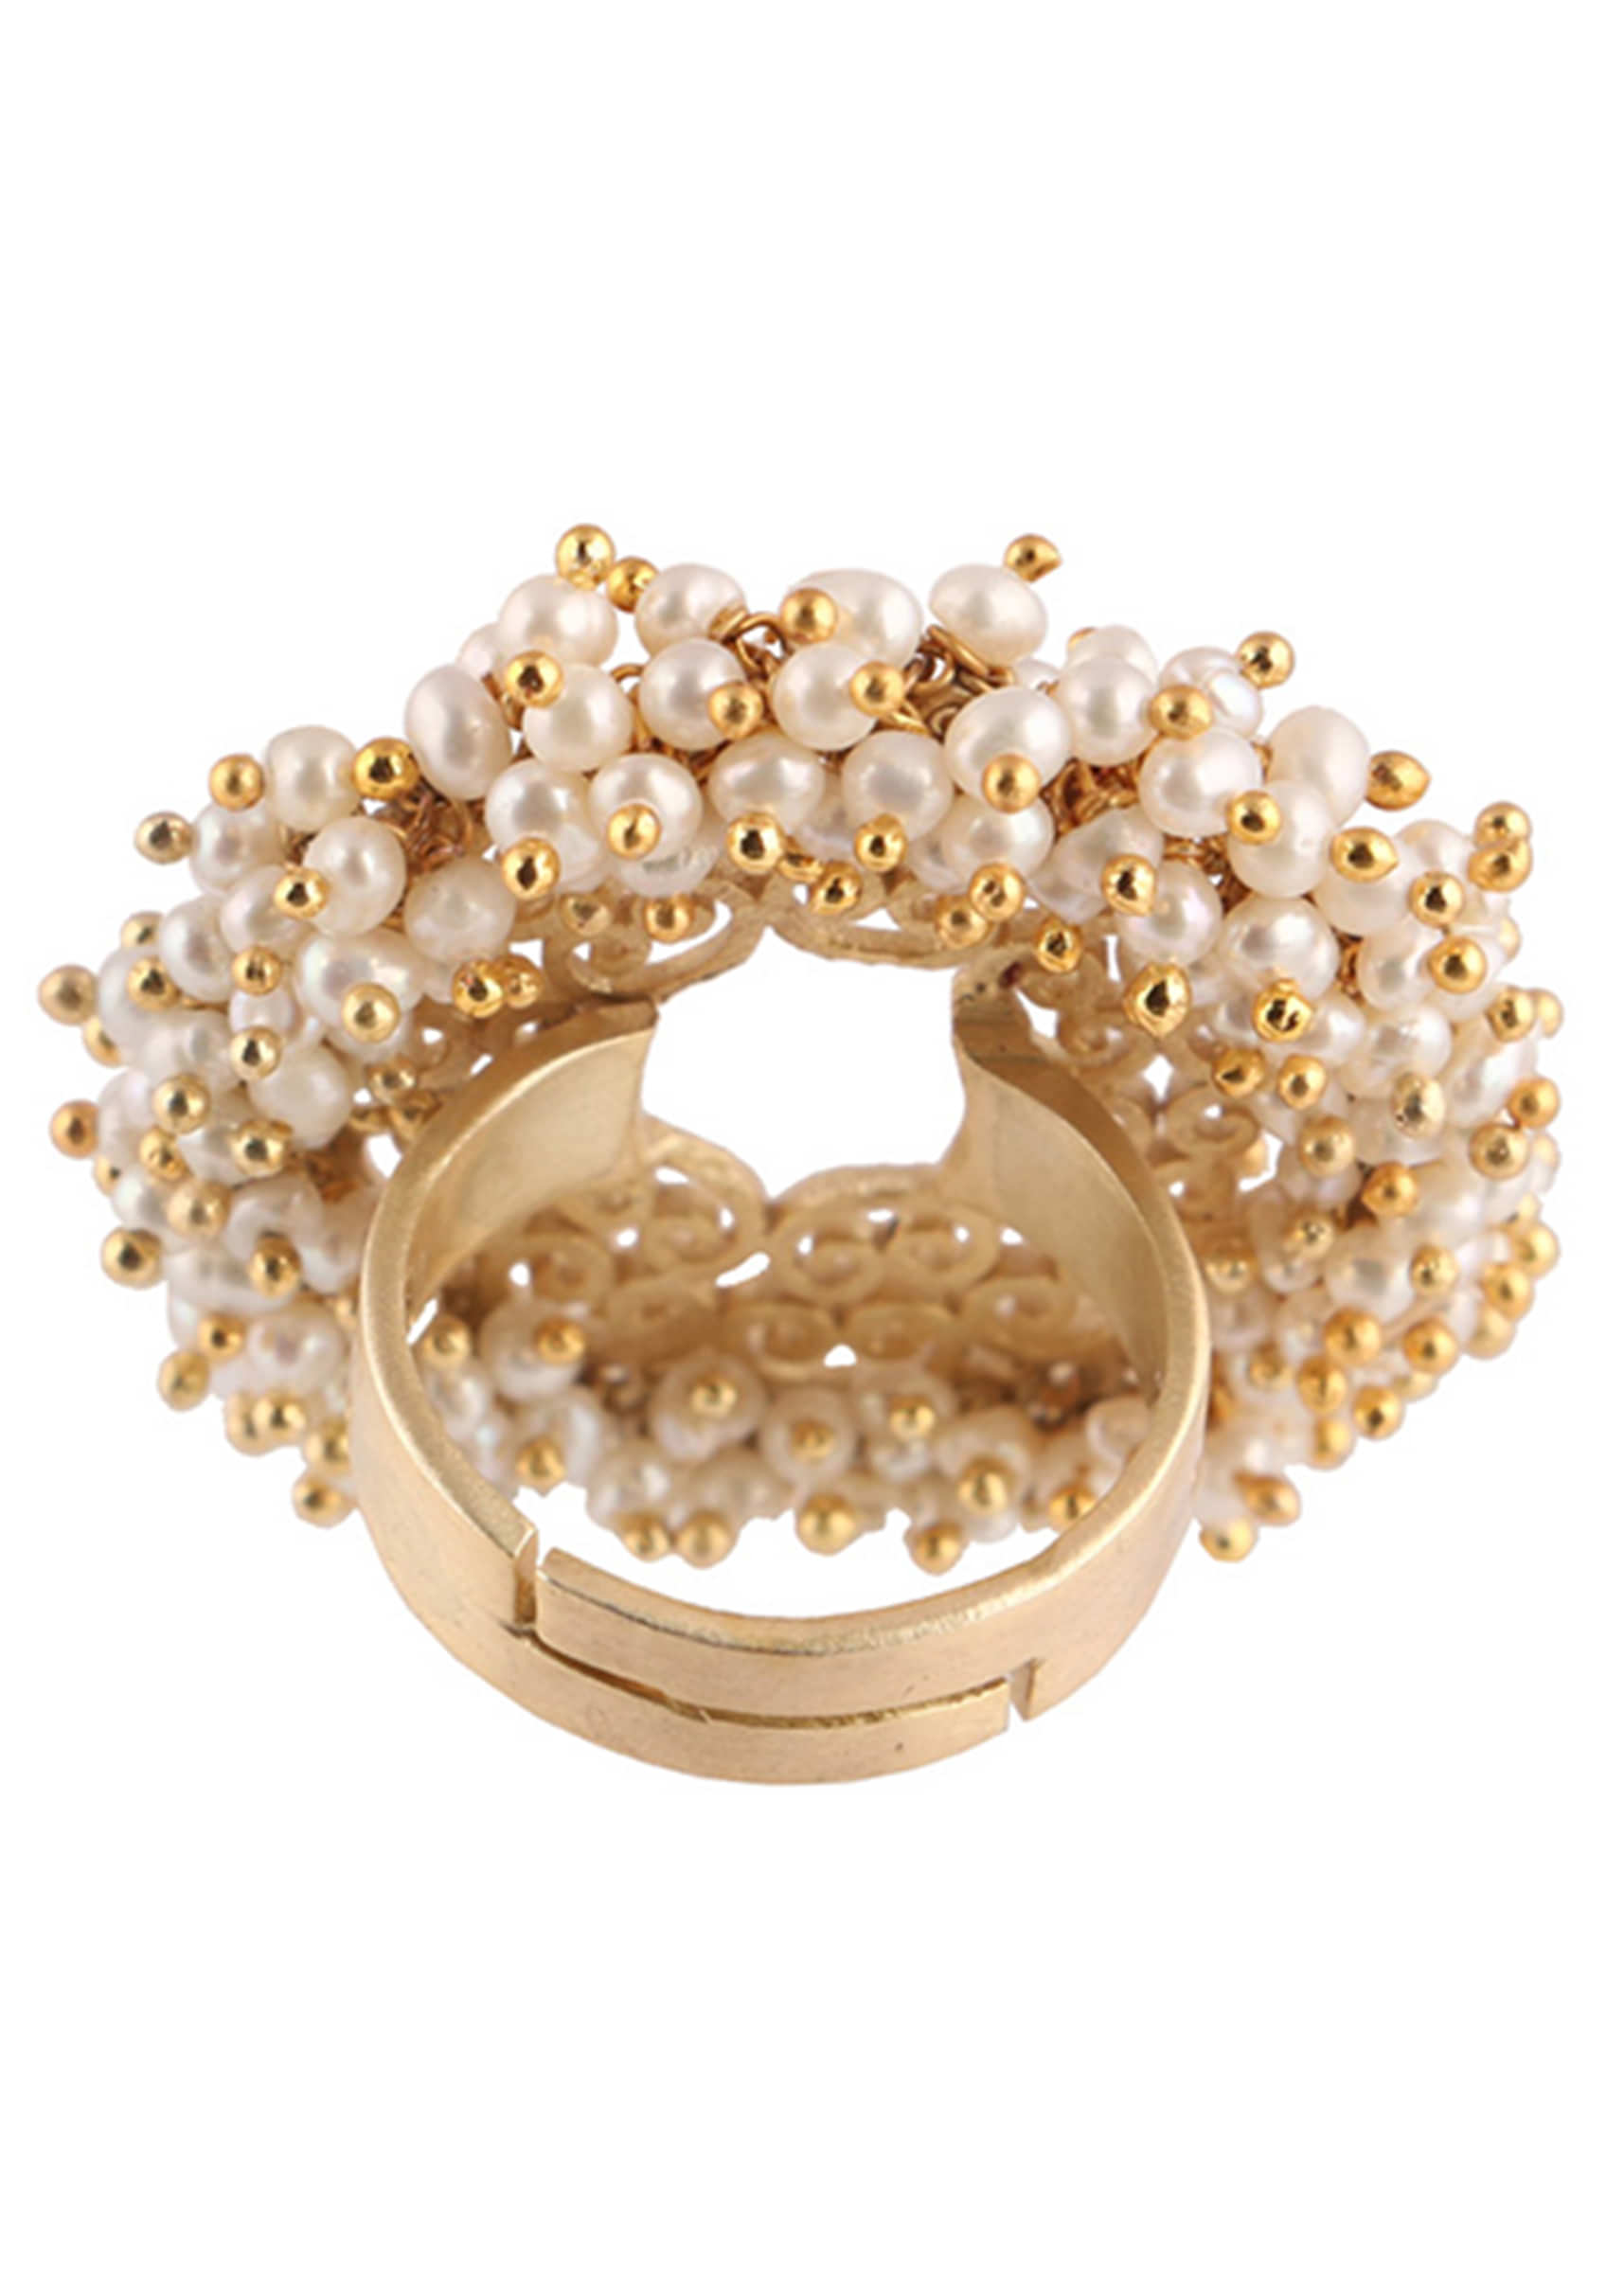 Gold Plated Ring Edged In Pearls And Carved Filigree Design By Zariin